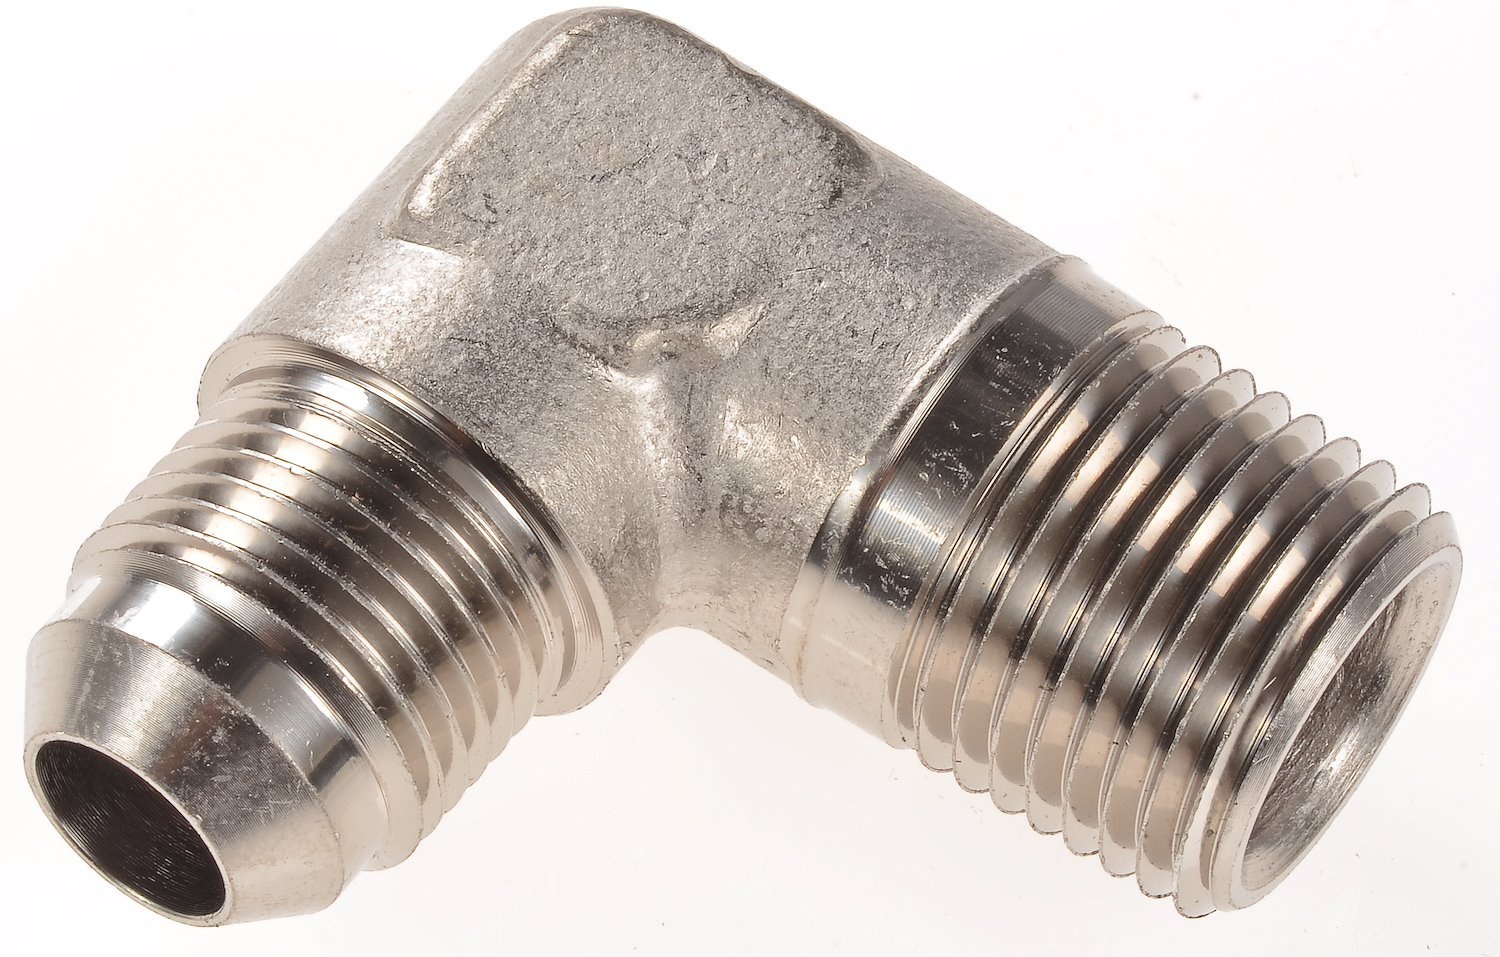 AN to NPT 90-Degree Adapter Fitting [-8 AN Male to 1/2 in. NPT Male, Nickel]